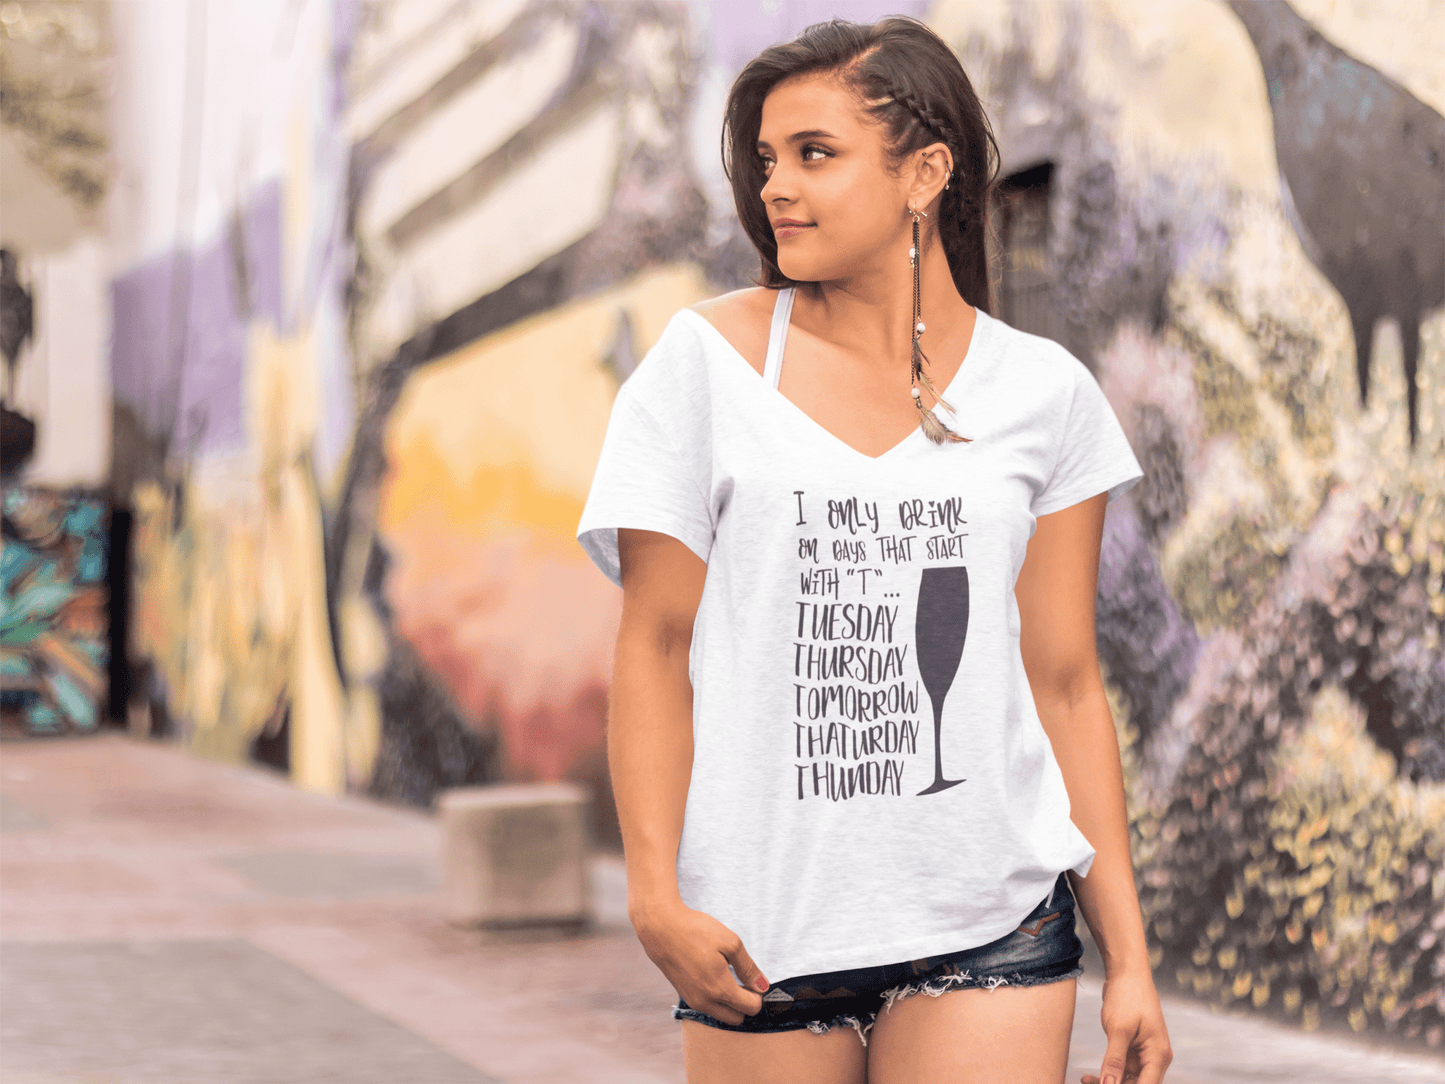 ULTRABASIC Damen-T-Shirt „I Only Drink On Days That Start With T“ – Lustiges Humor-Kurzarm-T-Shirt